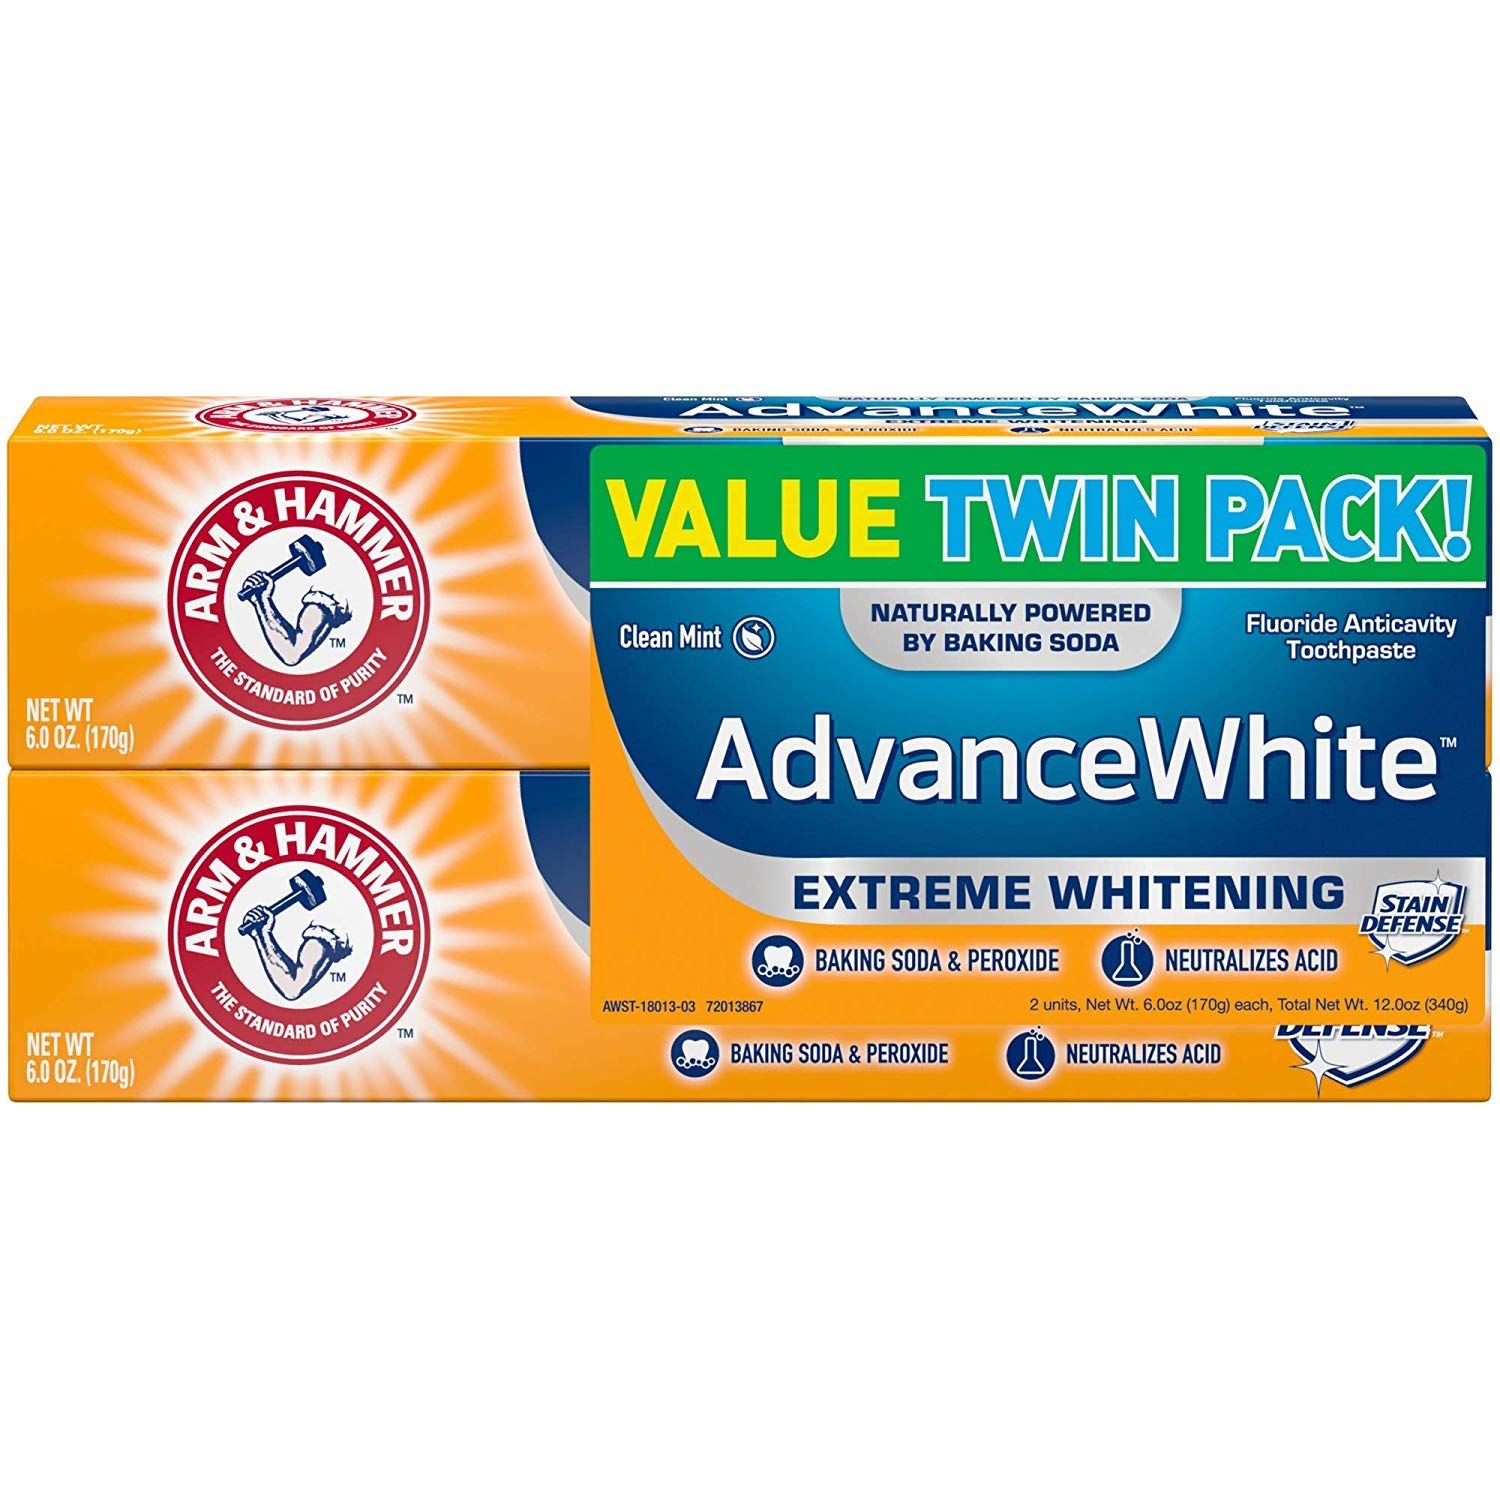 Book Cover ARM & HAMMER Advanced White Extreme Whitening Toothpaste, TWIN PACK (Contains Two 6oz Tubes) -Clean Mint- Fluoride Toothpaste